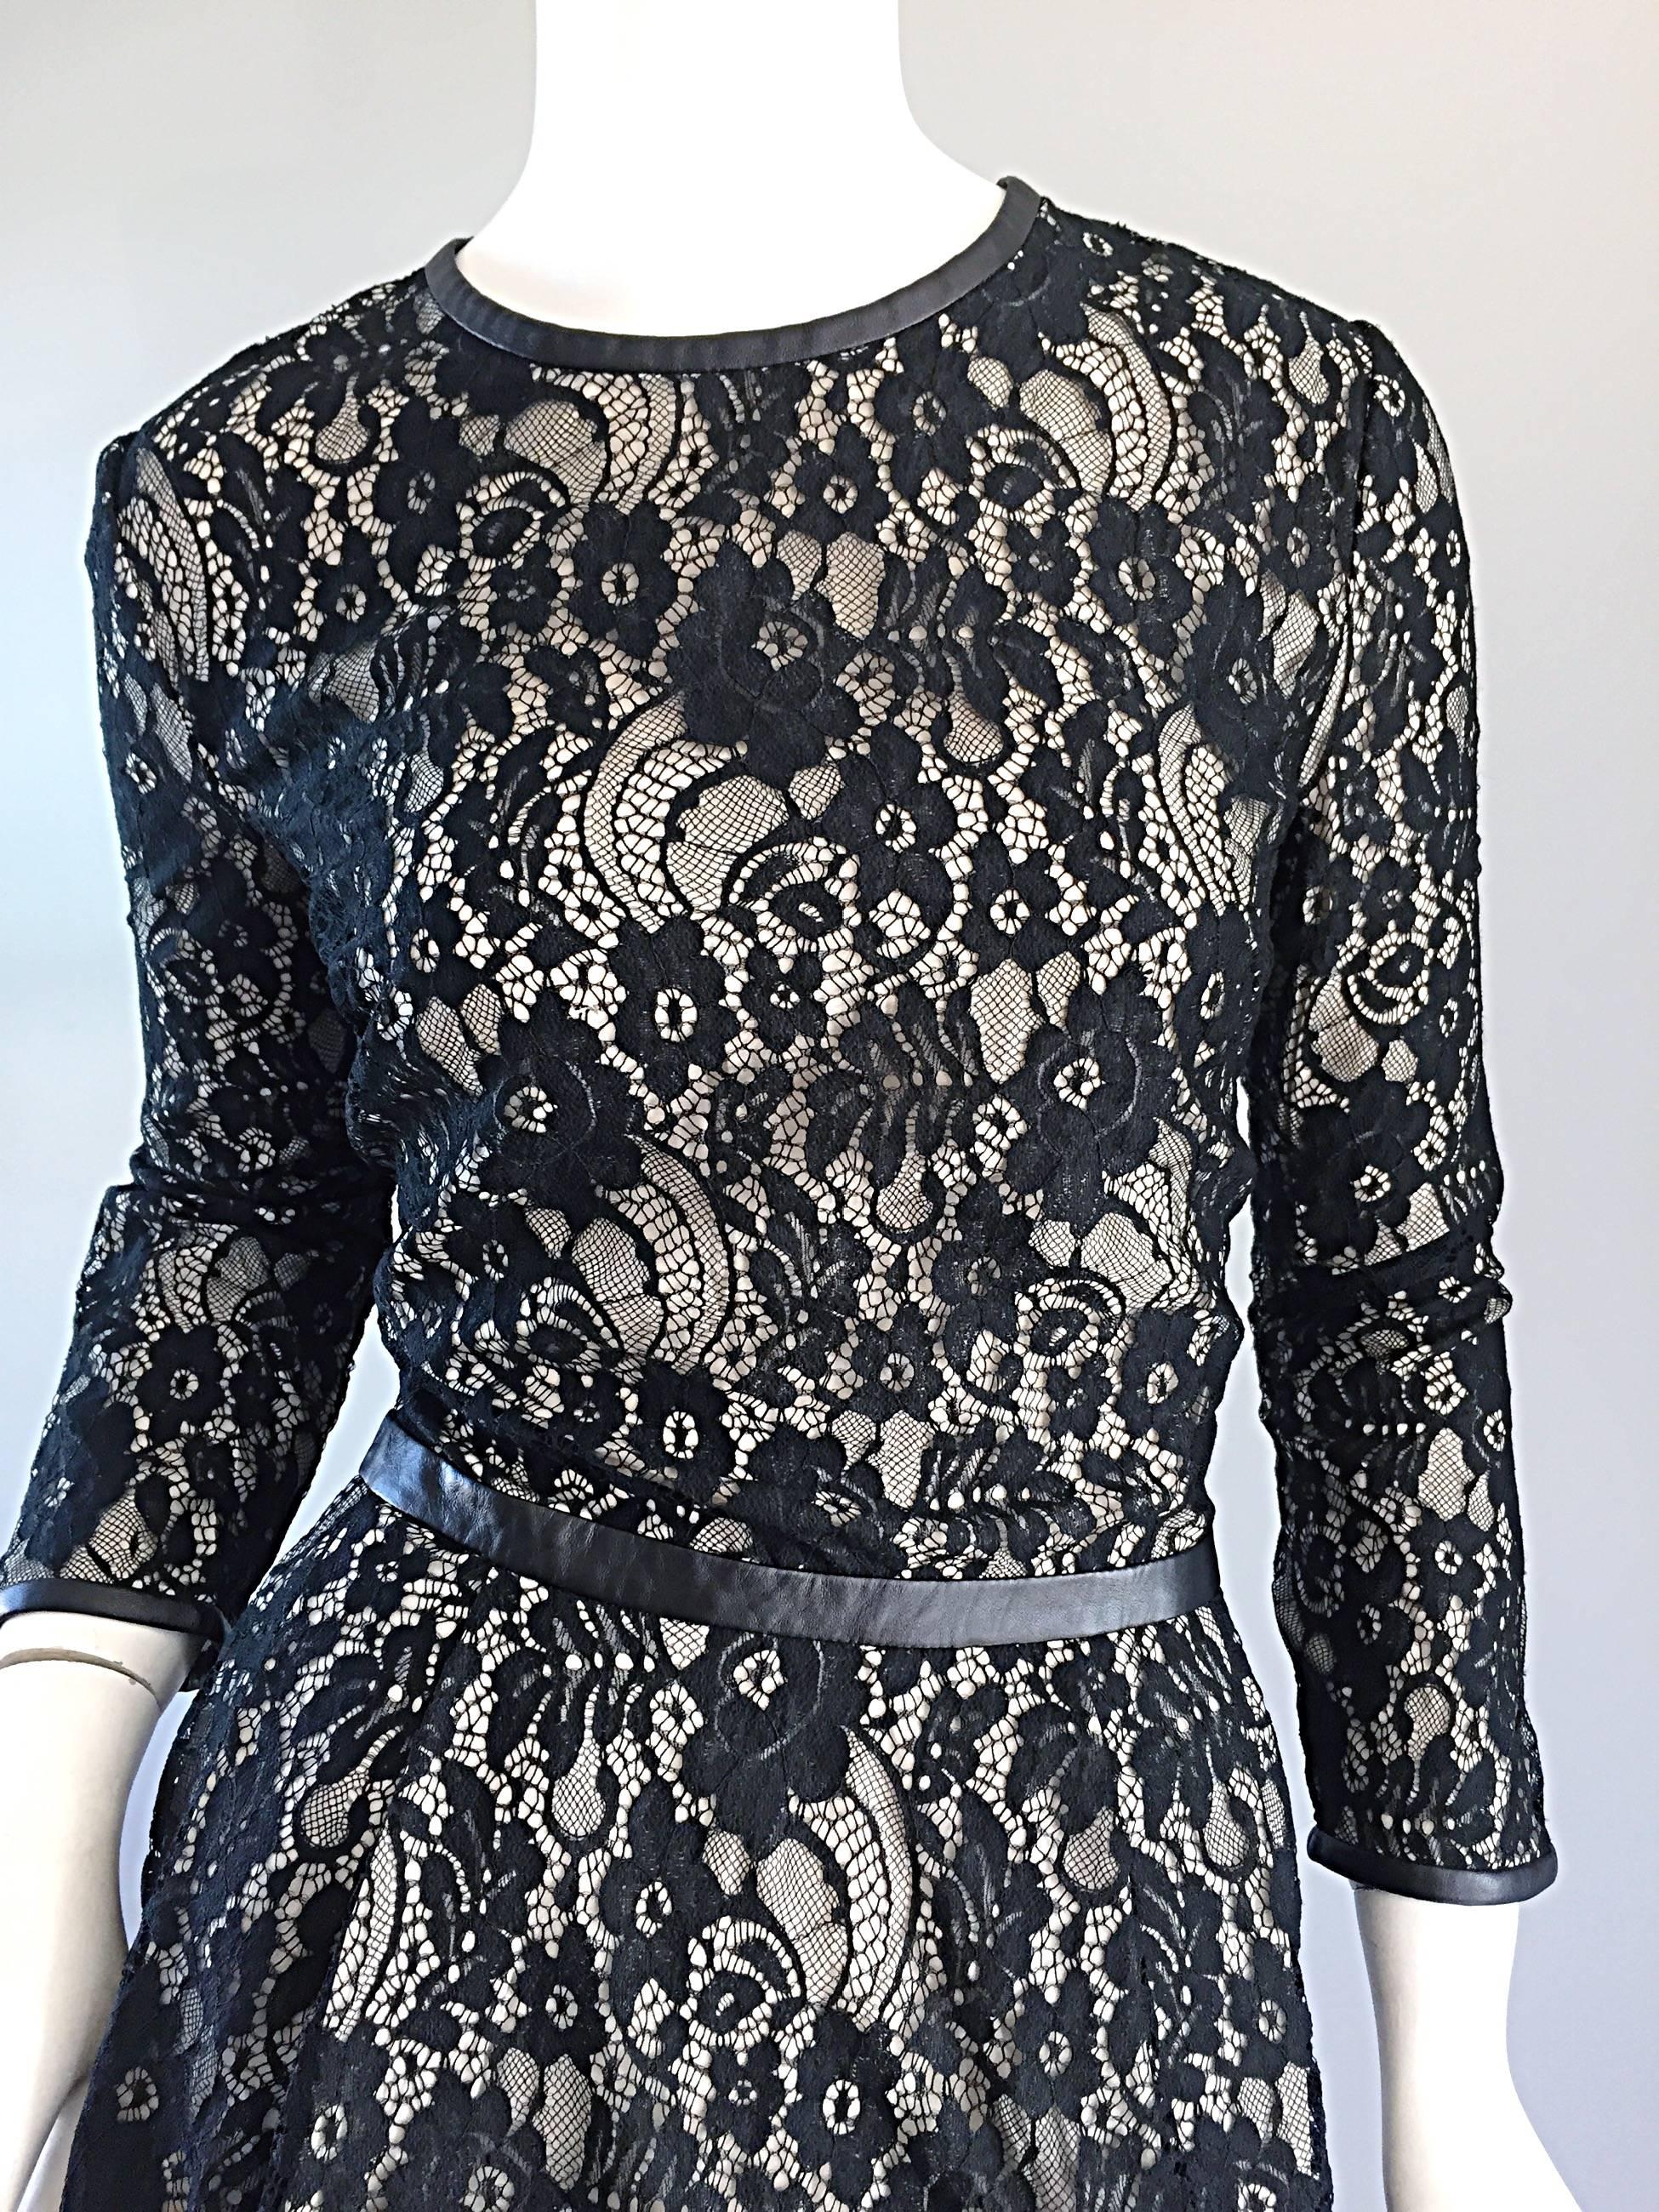 Women's Narcisco Rodriguez Black + Nude French Lace Dress w/ Leather Accents  For Sale